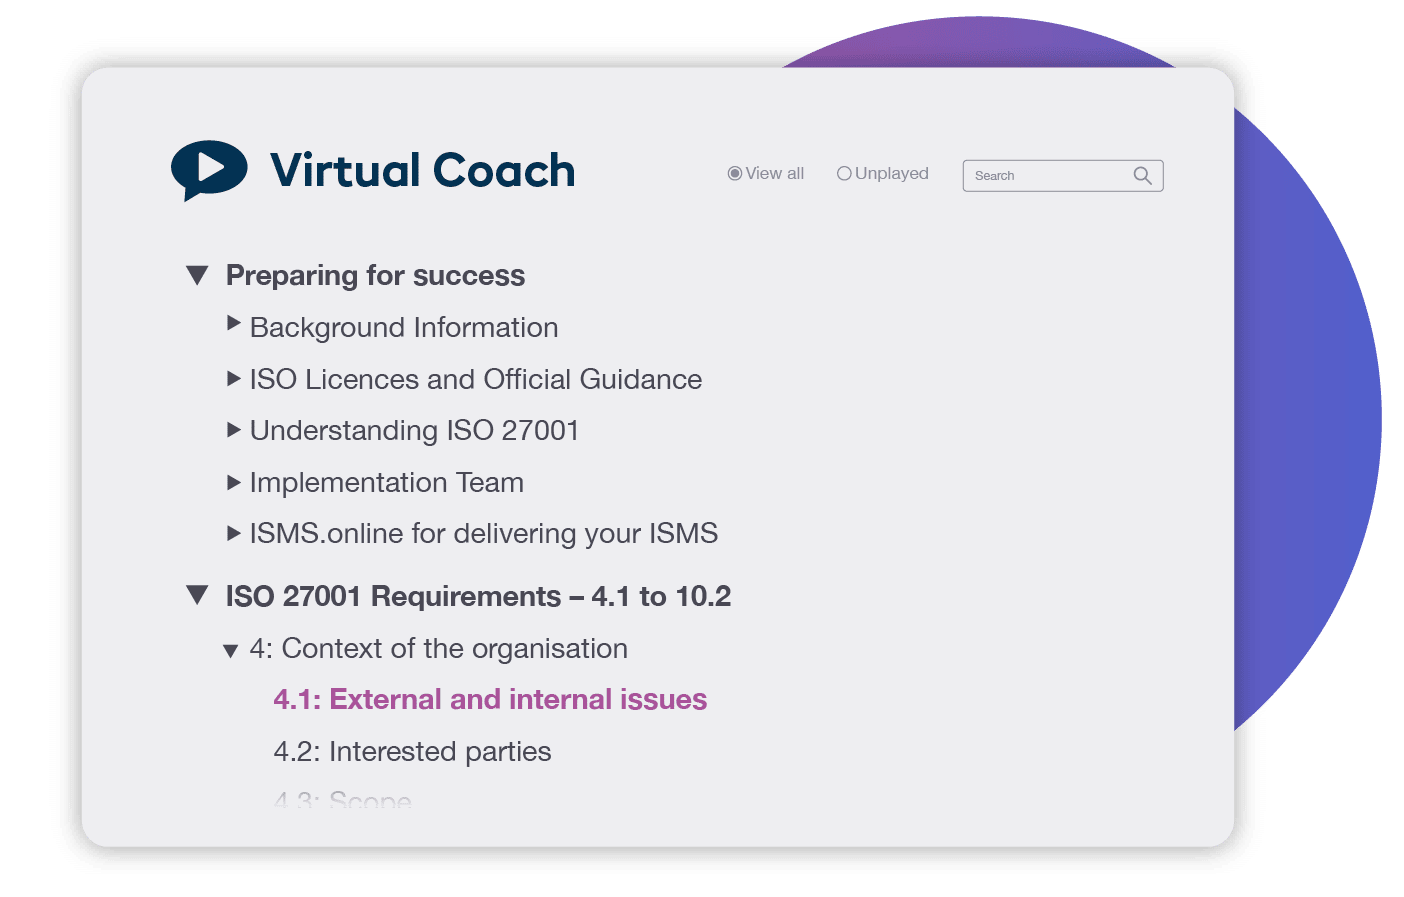 Virtual Coach features a library of video, checklists and guides for ISO 27001